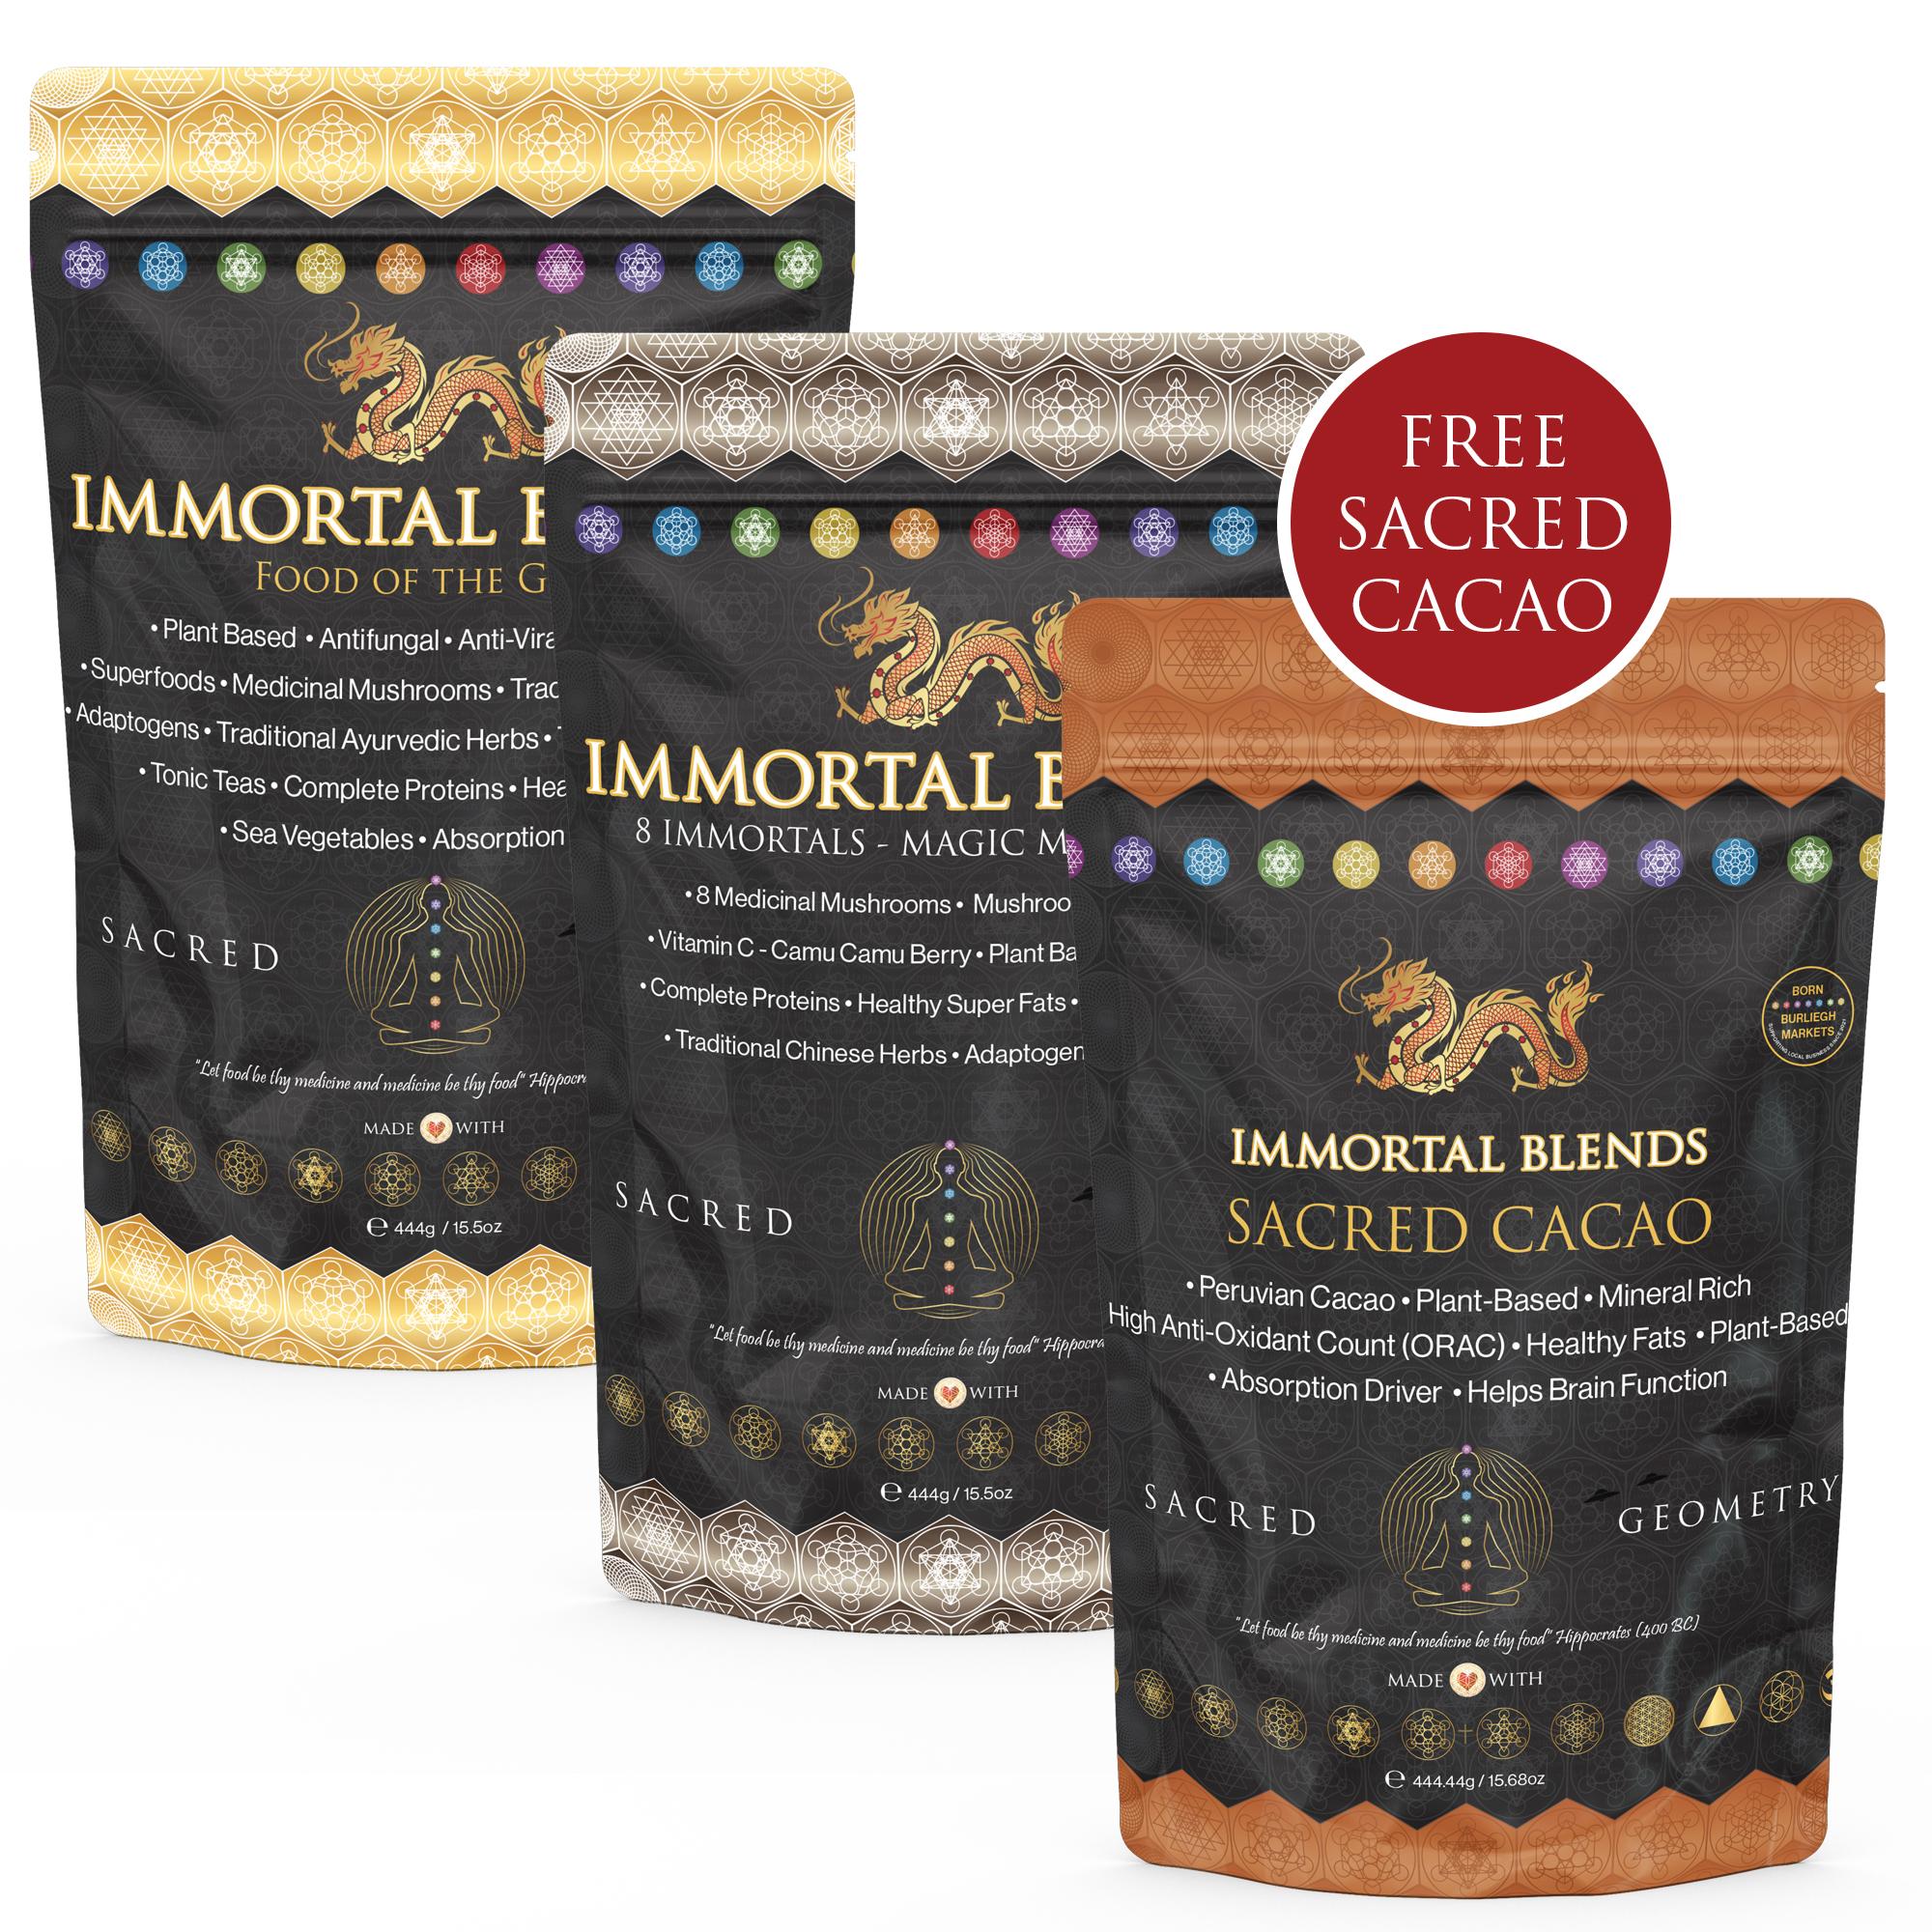 Infinite energy superfood pack with a free bag of sacred cacao